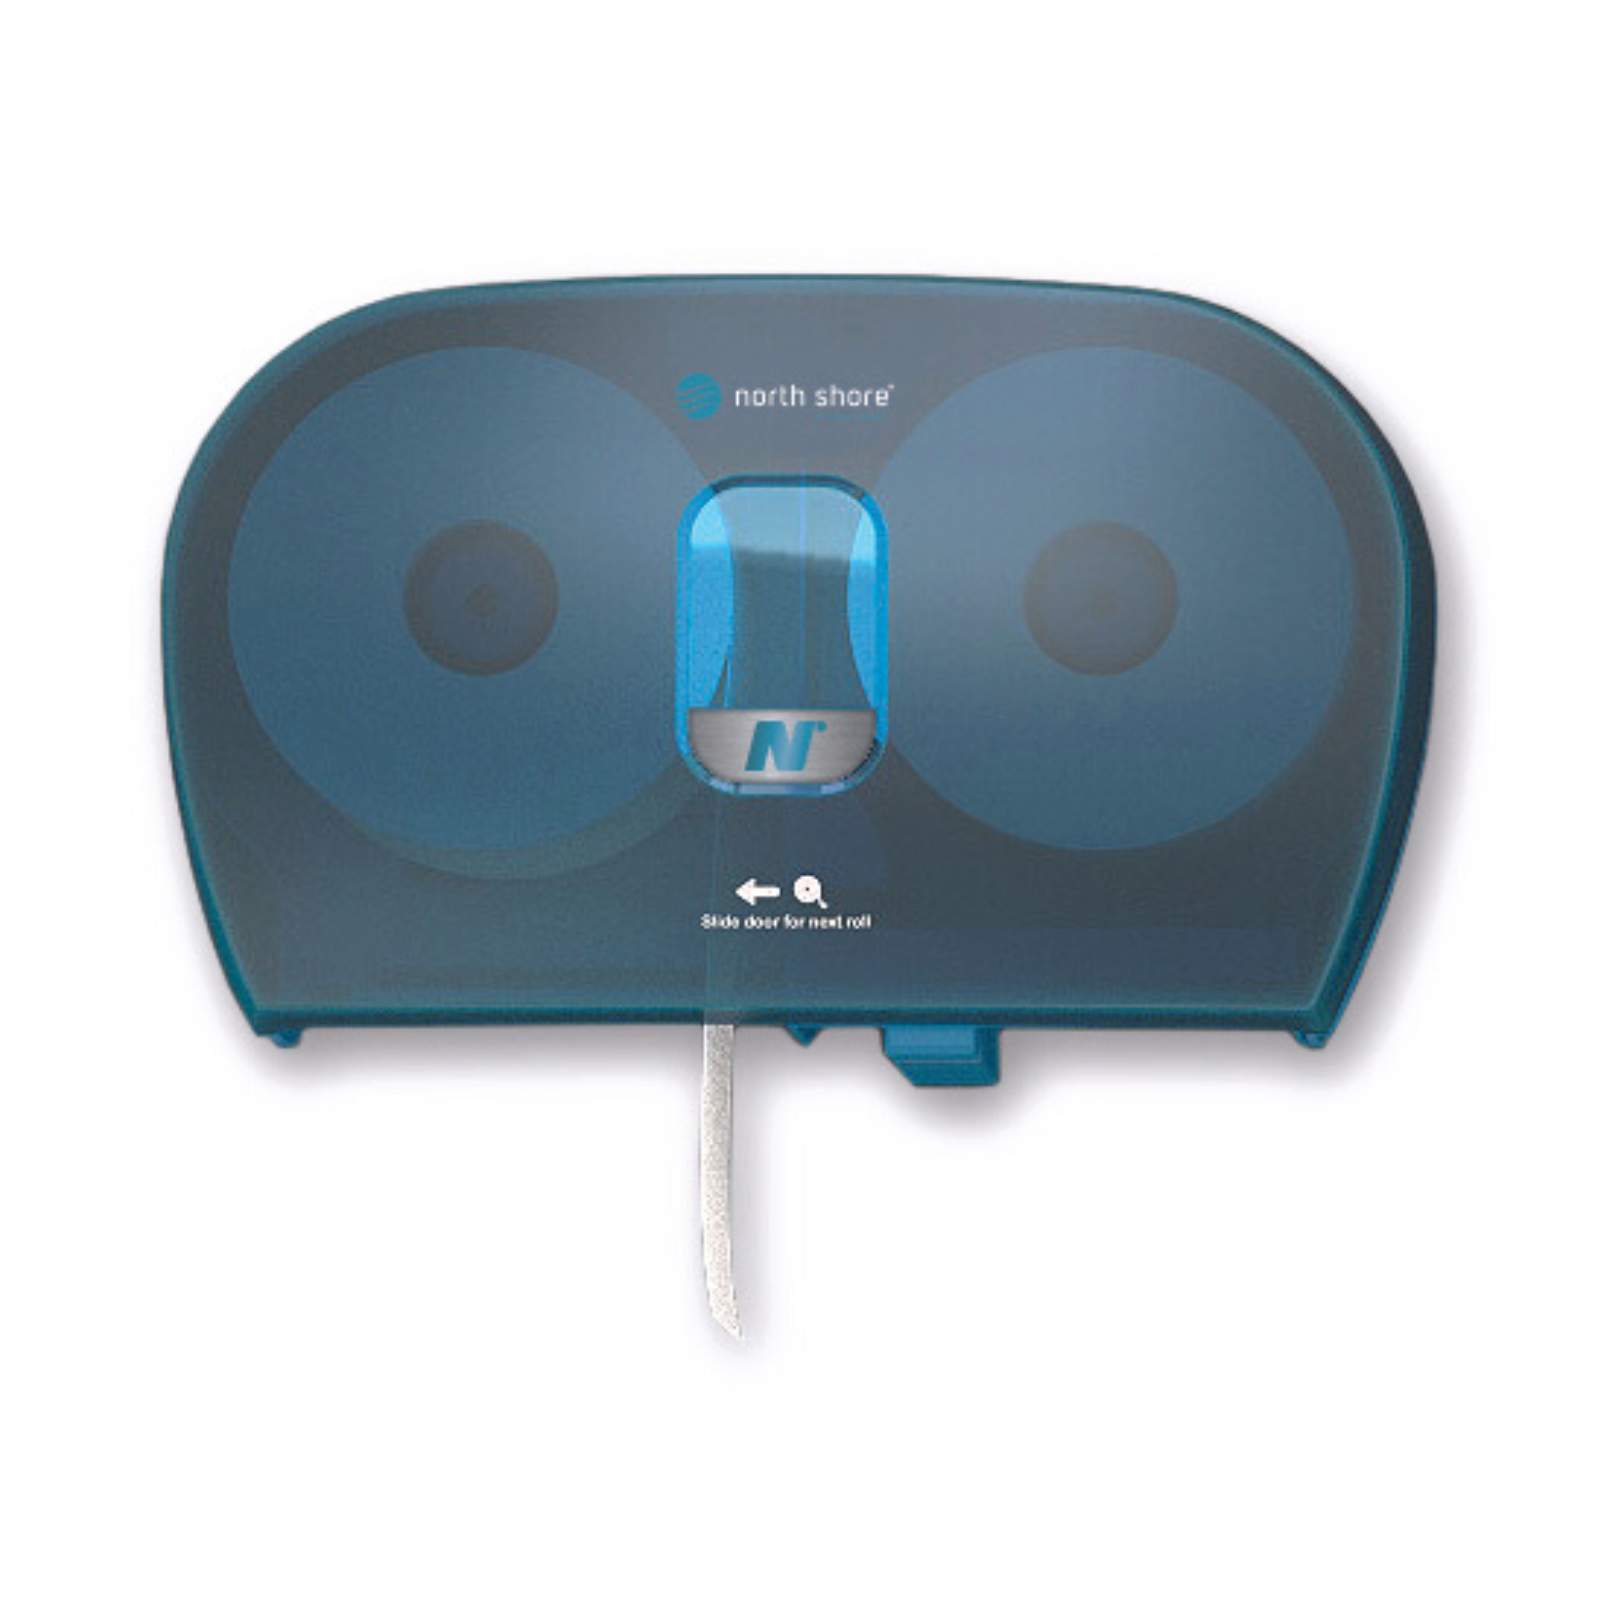 North Shore Side By Side Toilet Roll Dispenser - Blue Translucent